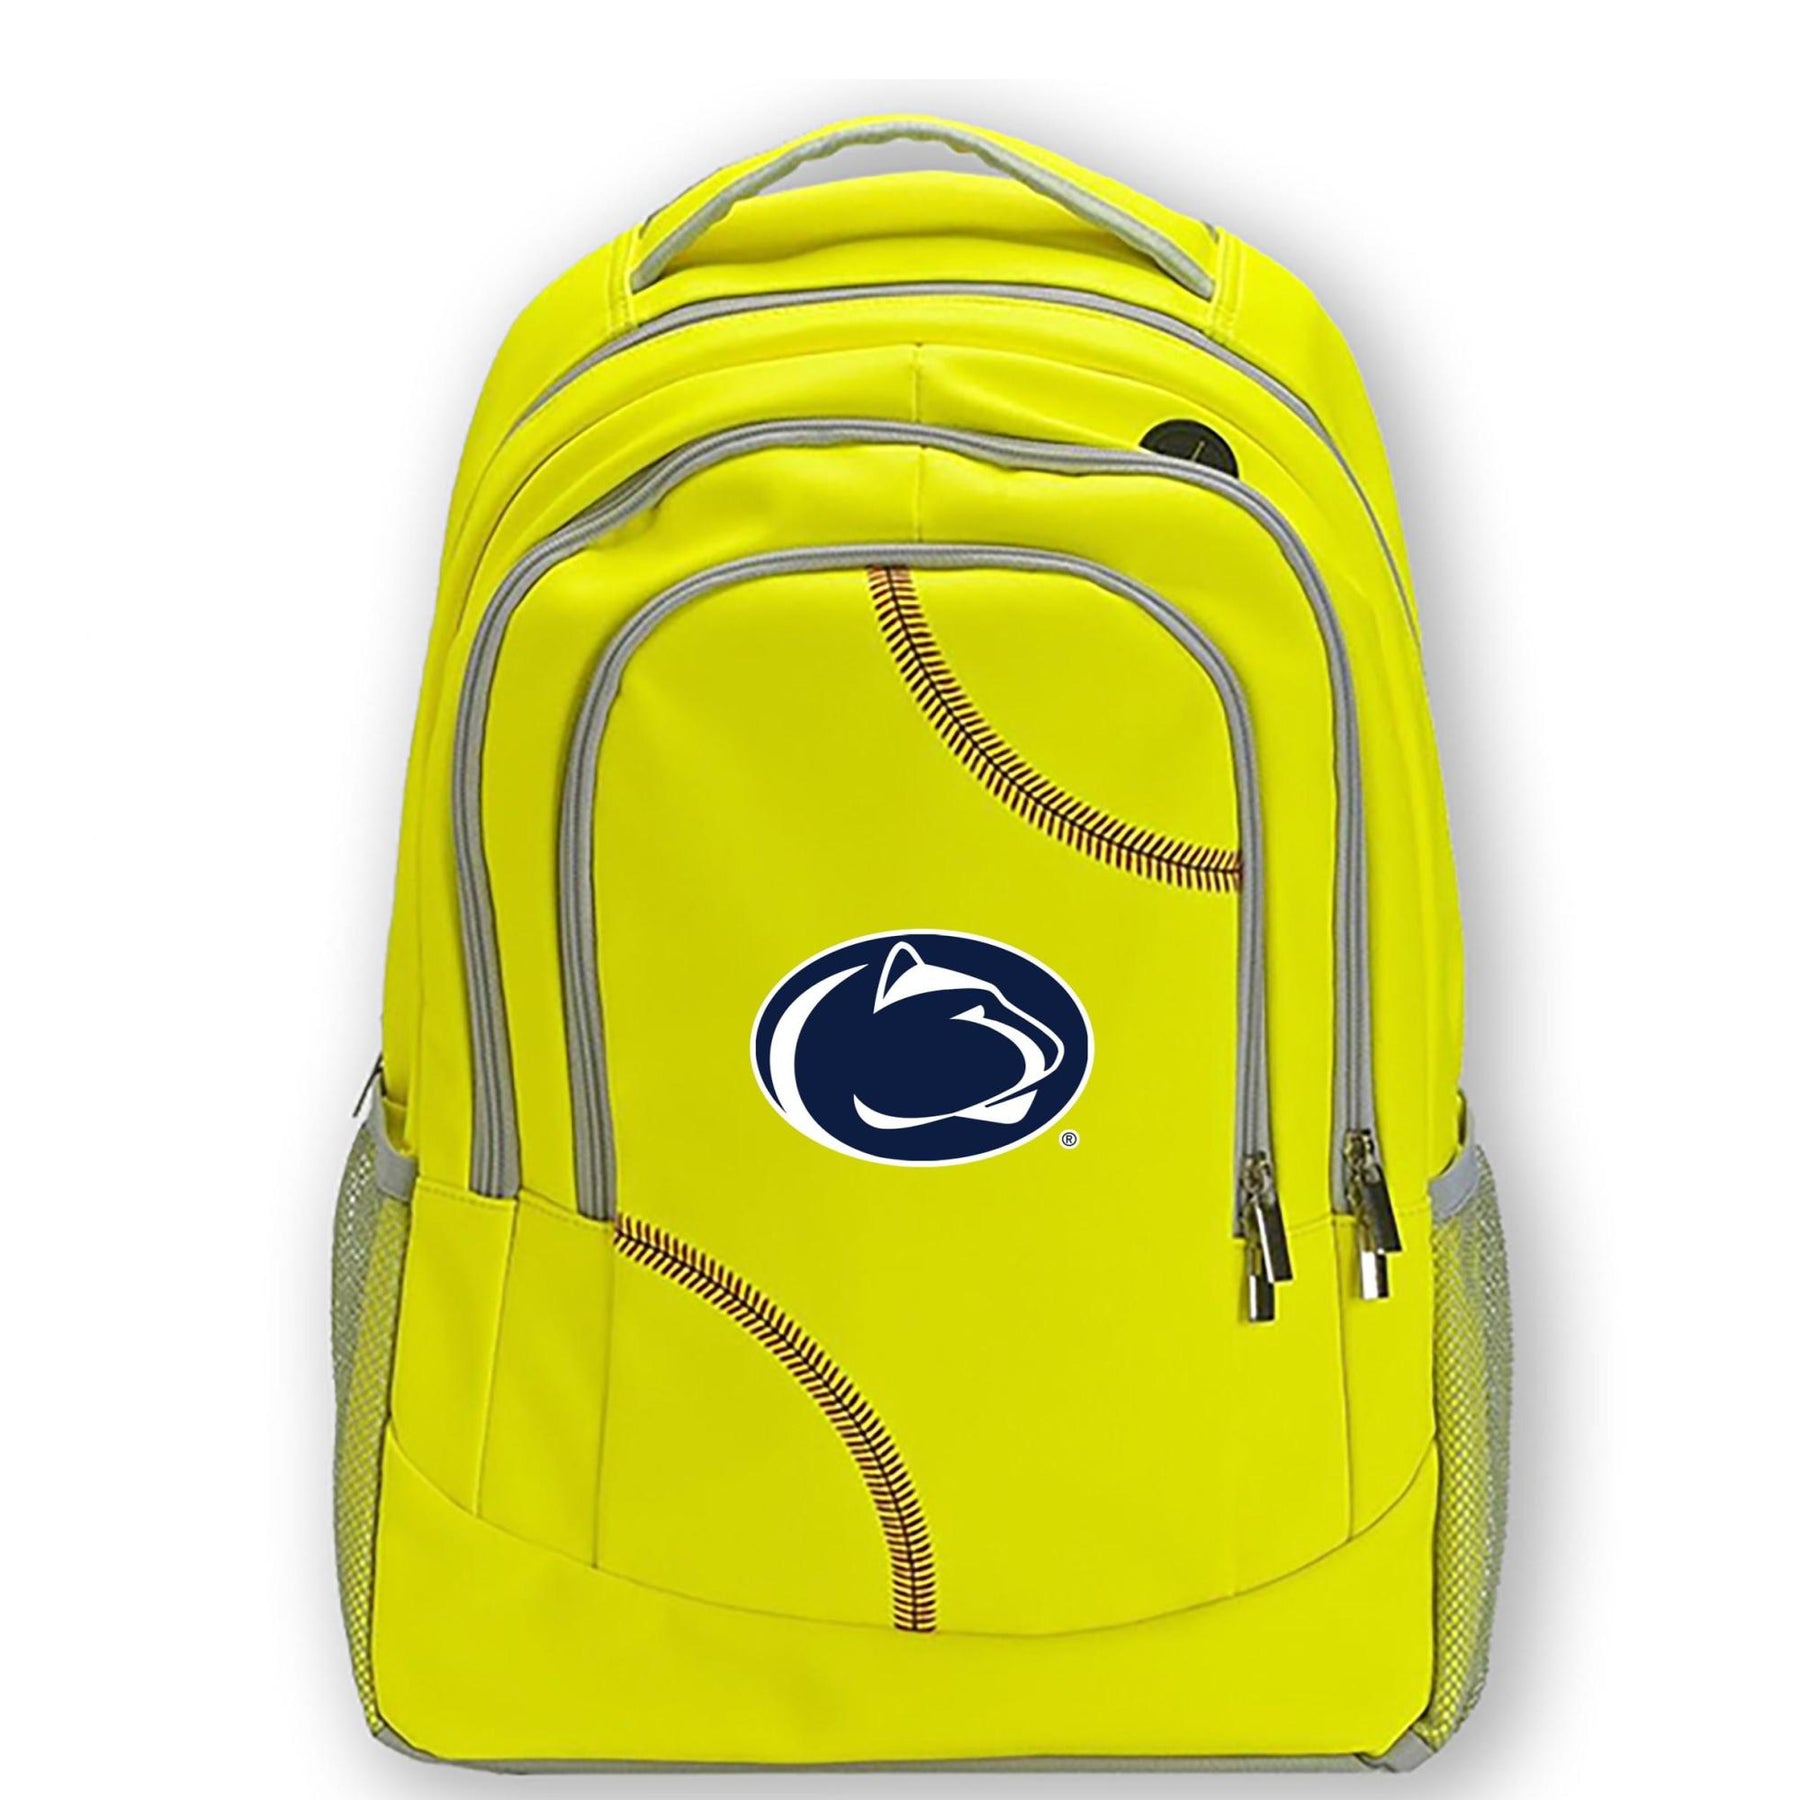 Softball Leather Material Penn State Nittany Lions Backpack Bag